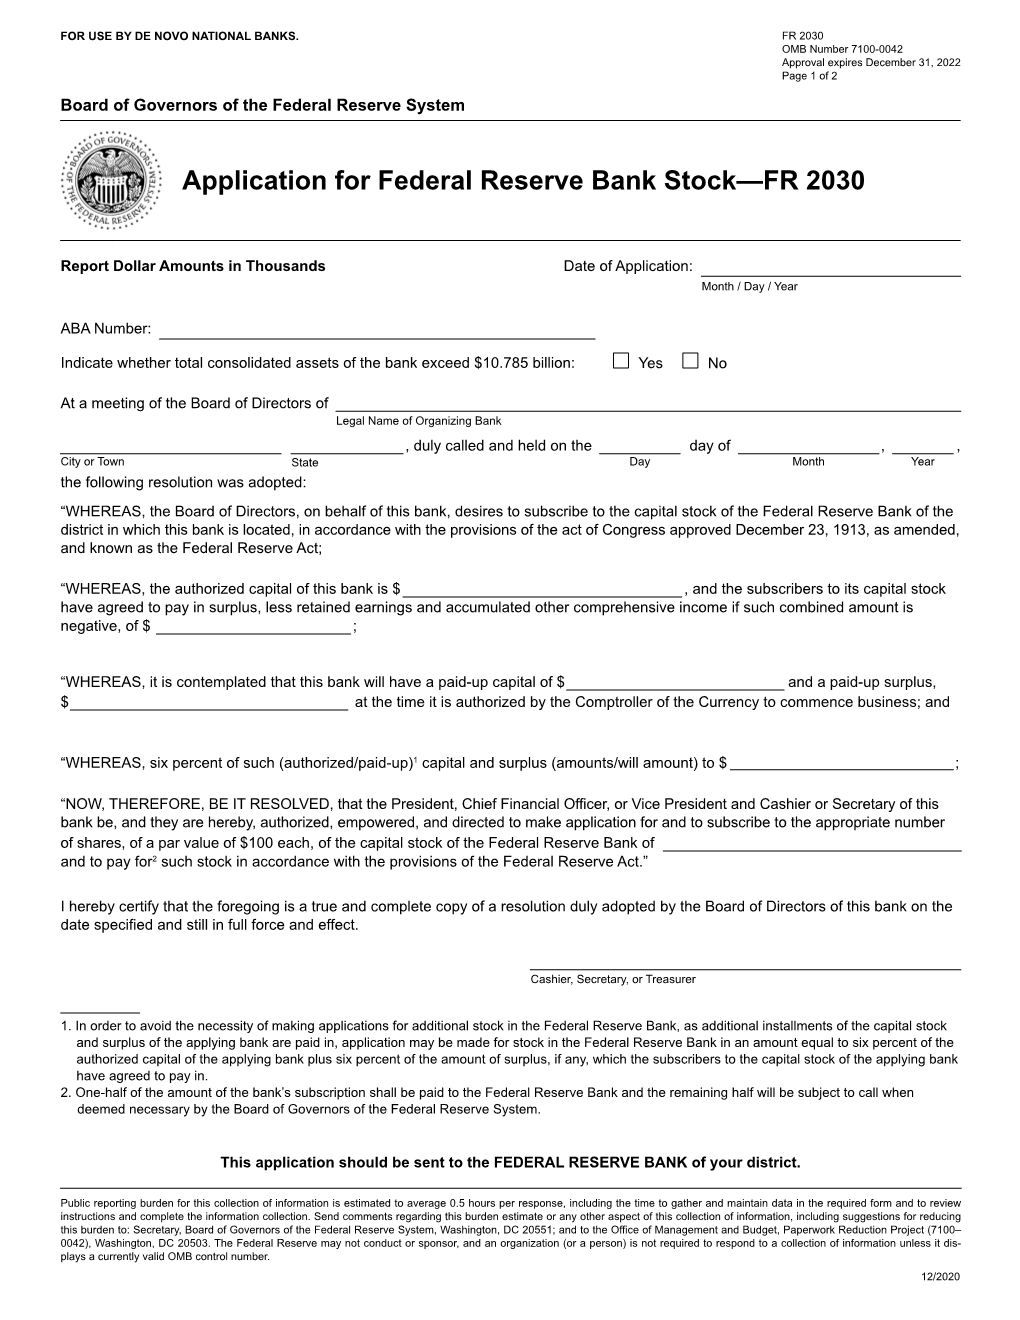 Application for Federal Reserve Bank Stock—FR 2030